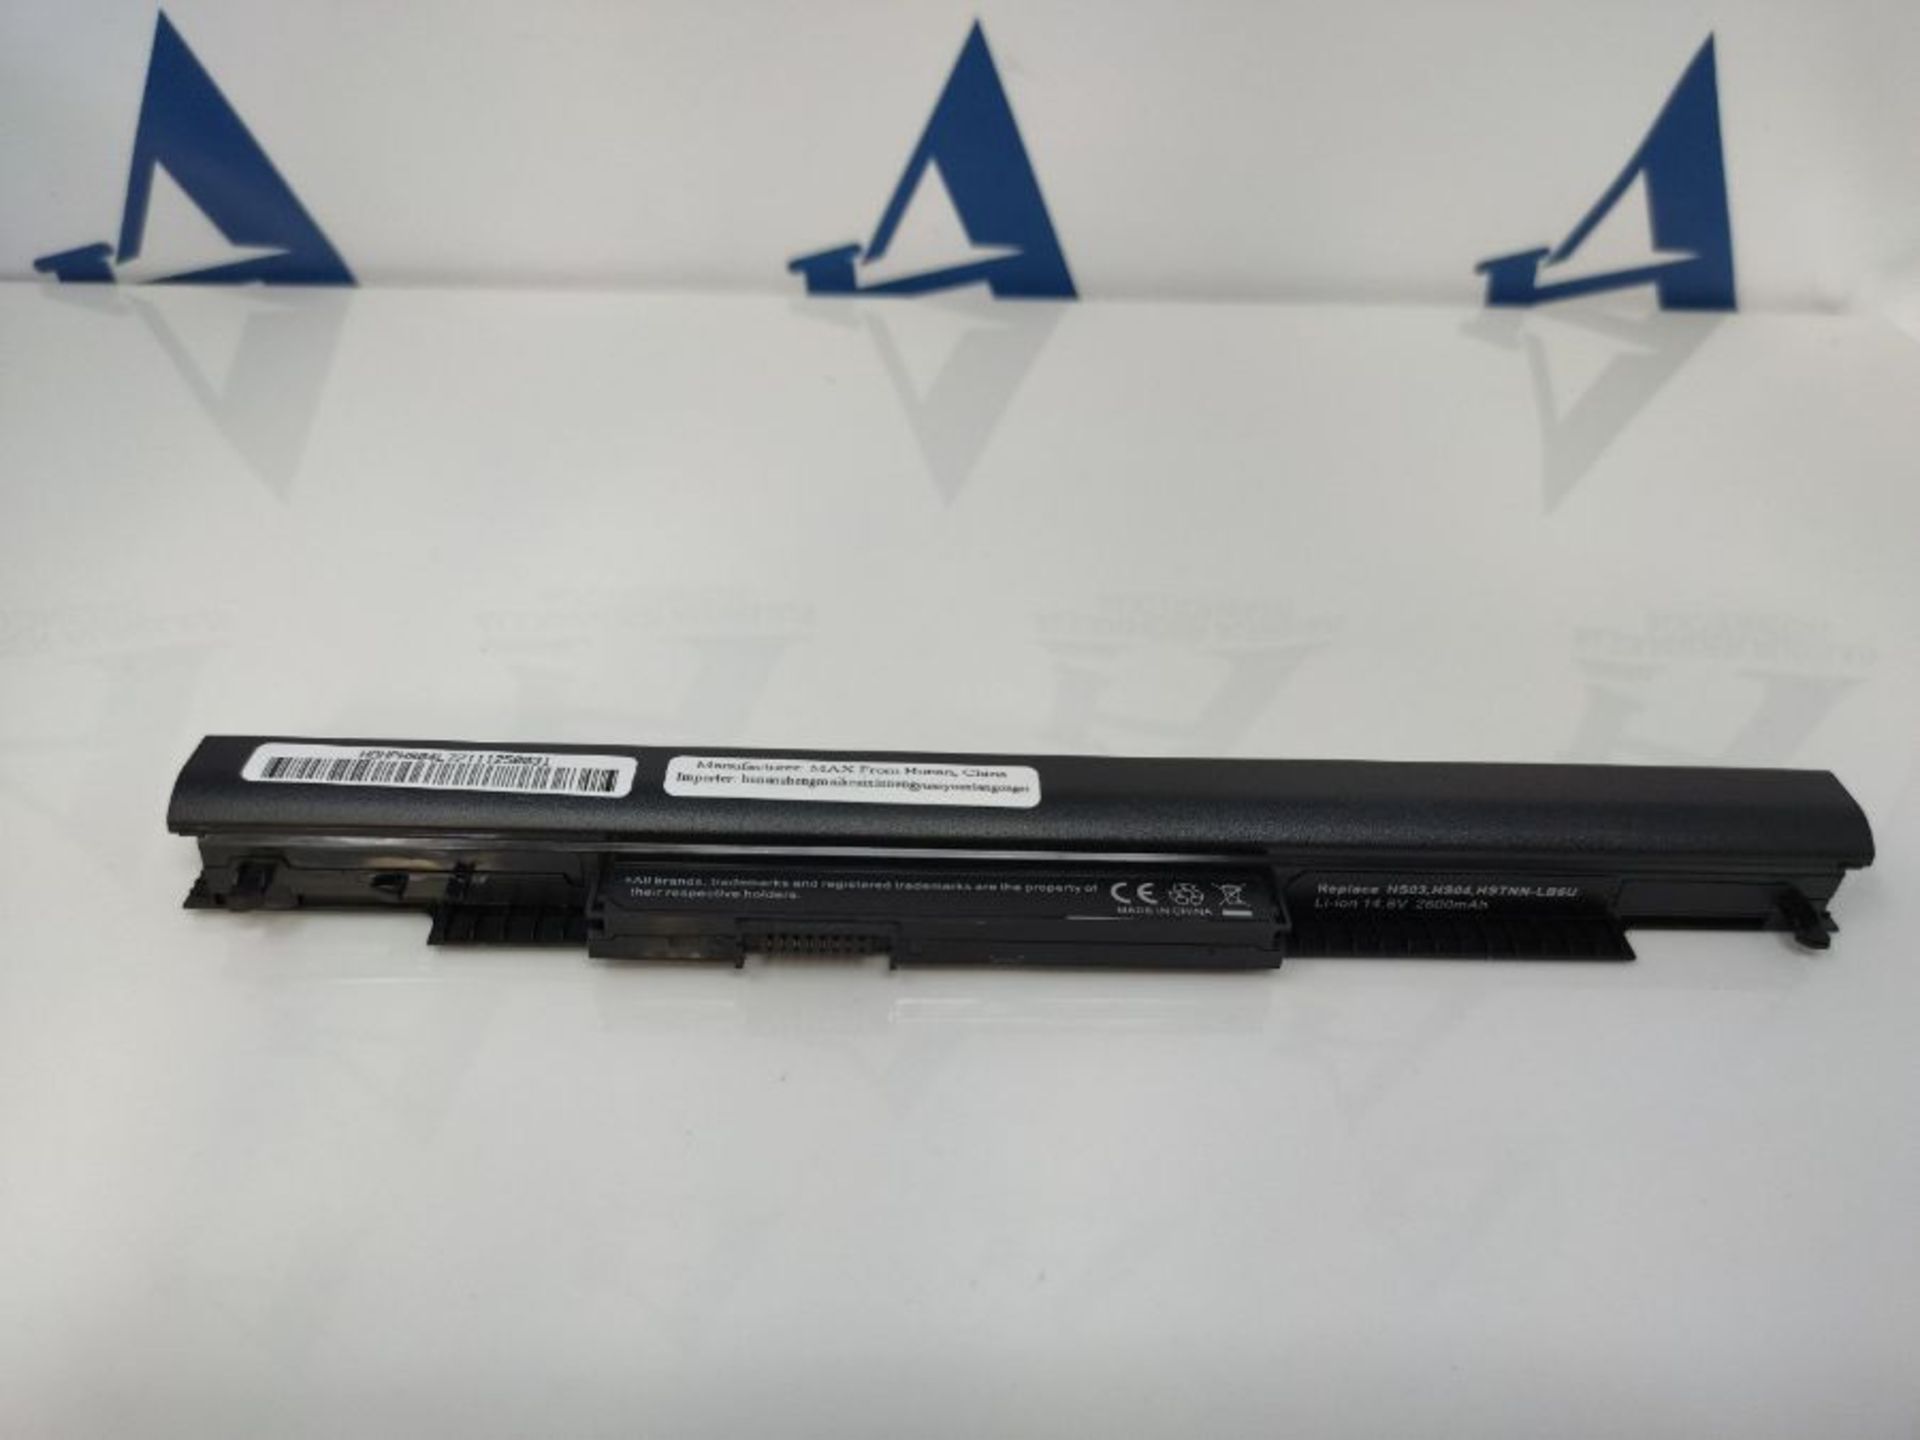 BTMKS Notebook Laptop Battery for HP HS04 HS03 807956-001 807957-001 807612-421 807611 - Image 2 of 2